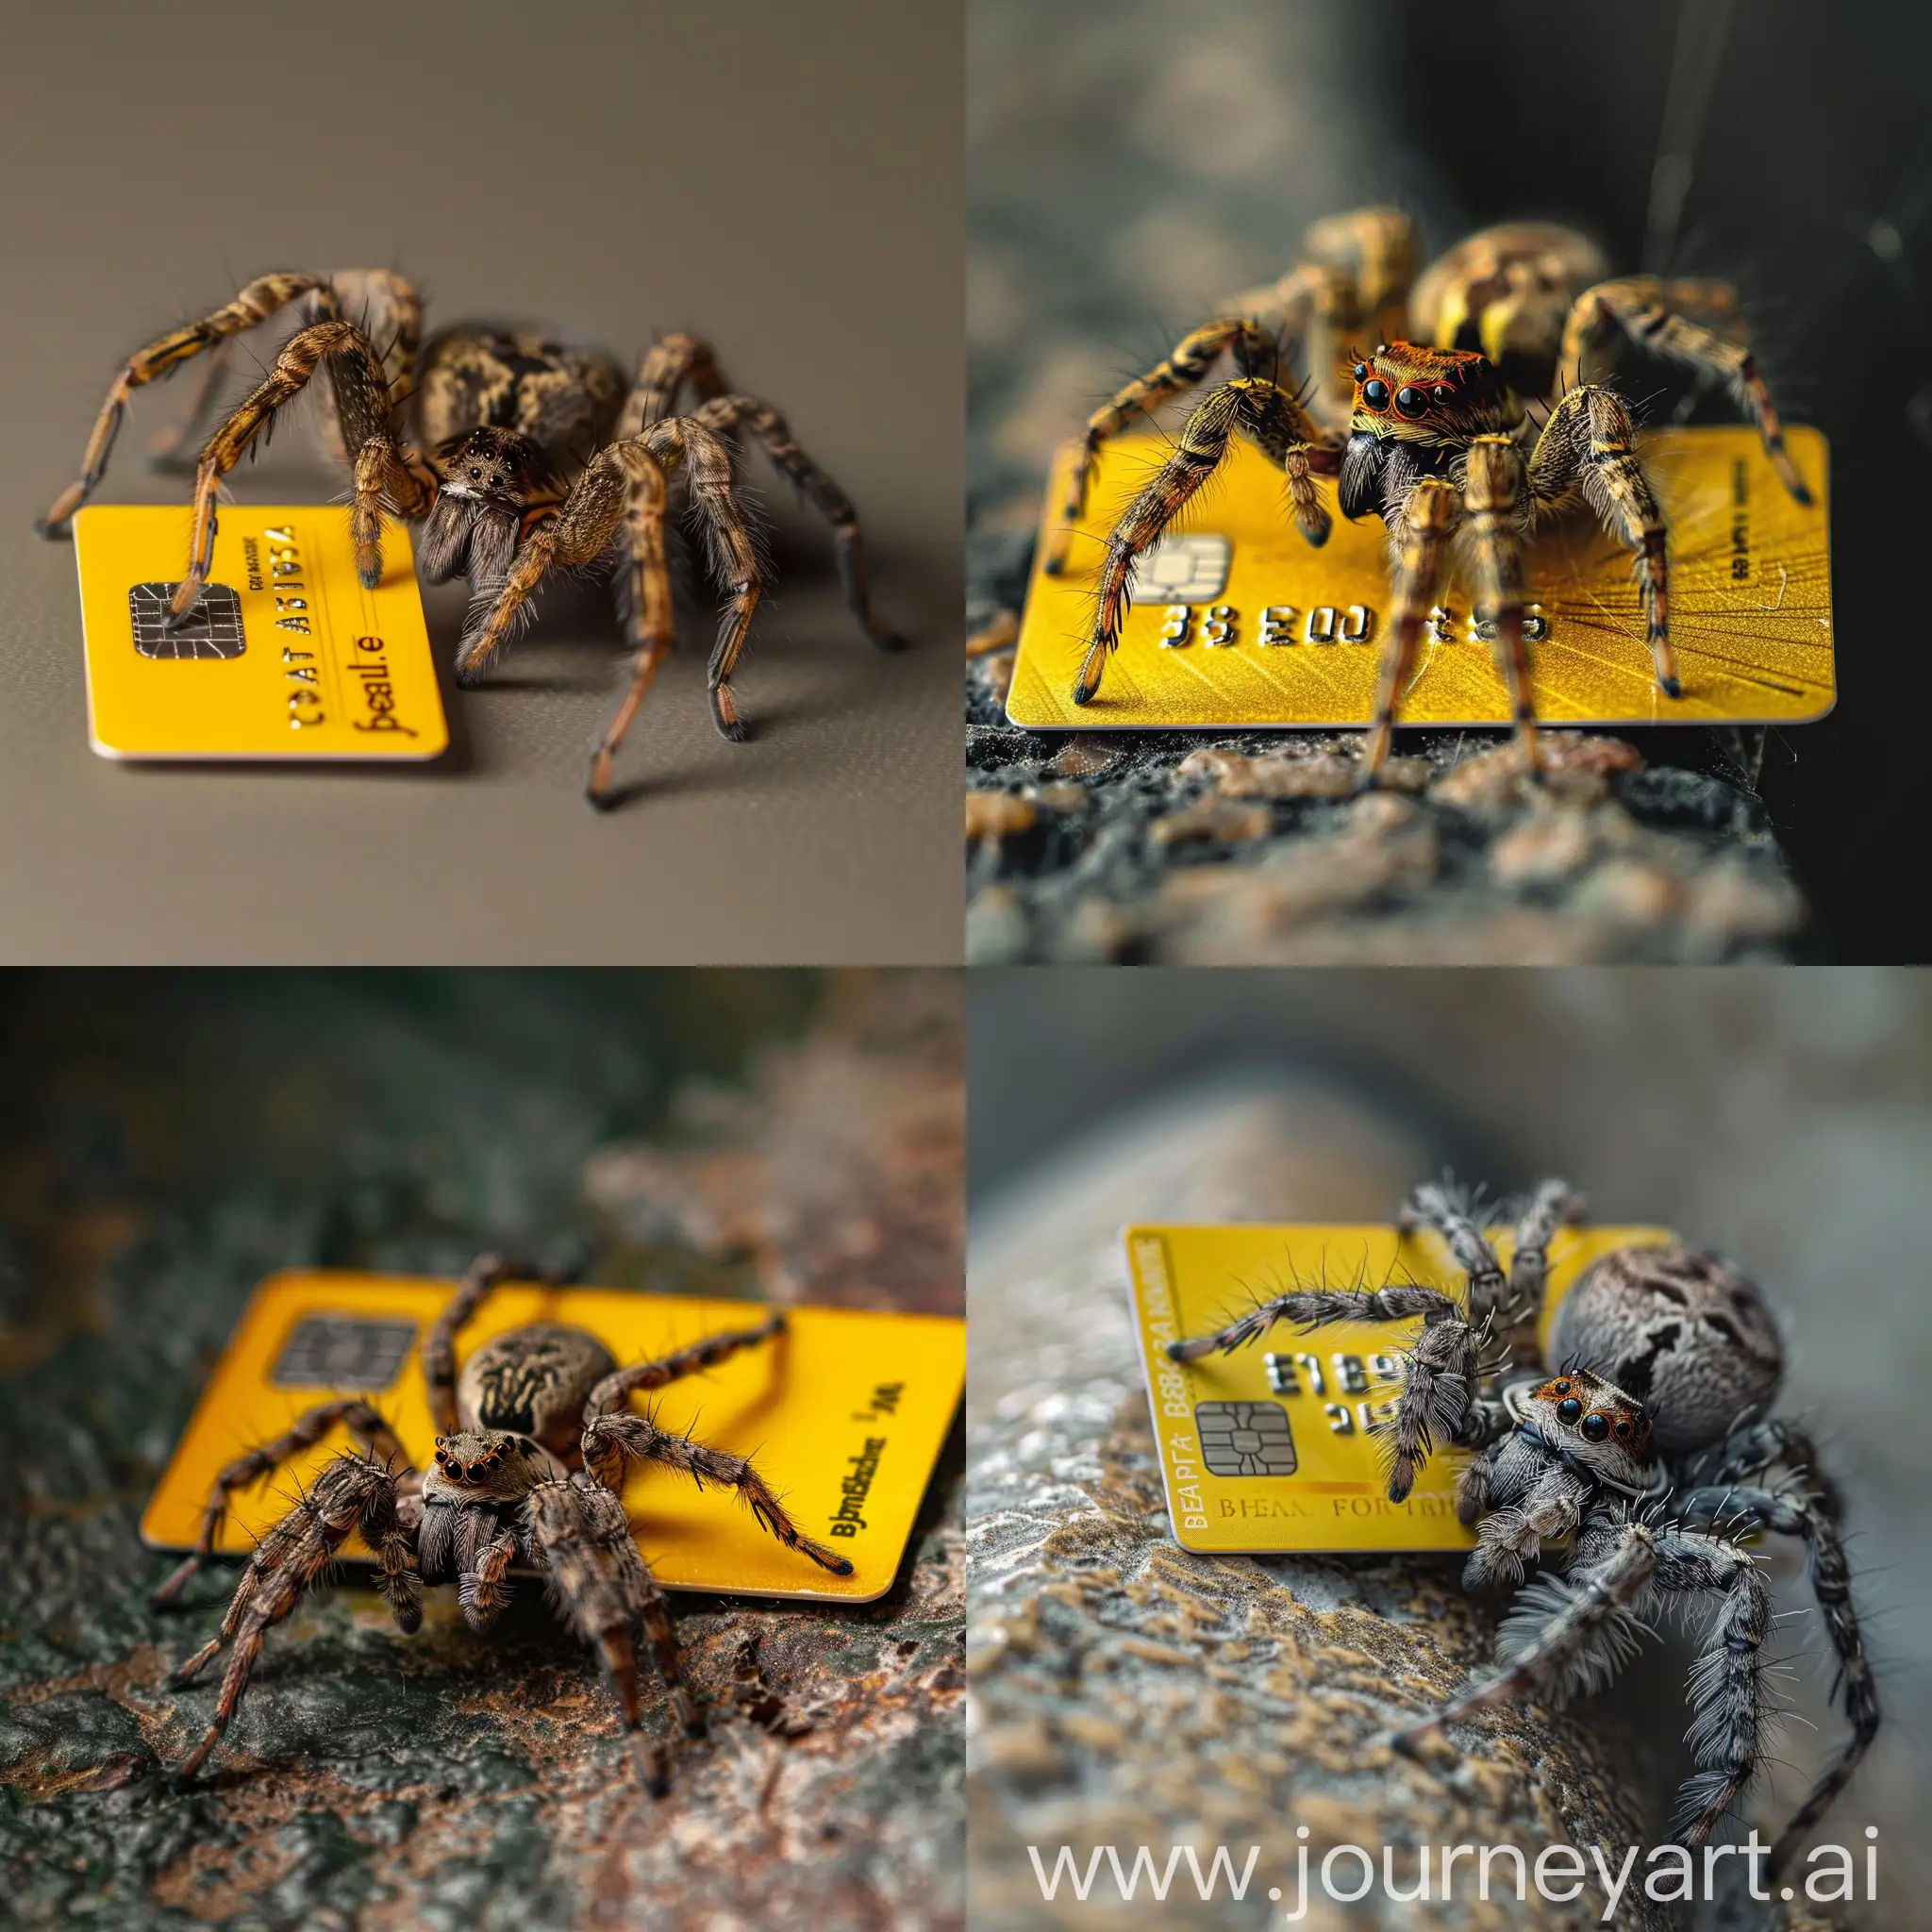 Person-Spider-Advertising-Yellow-Bank-Card